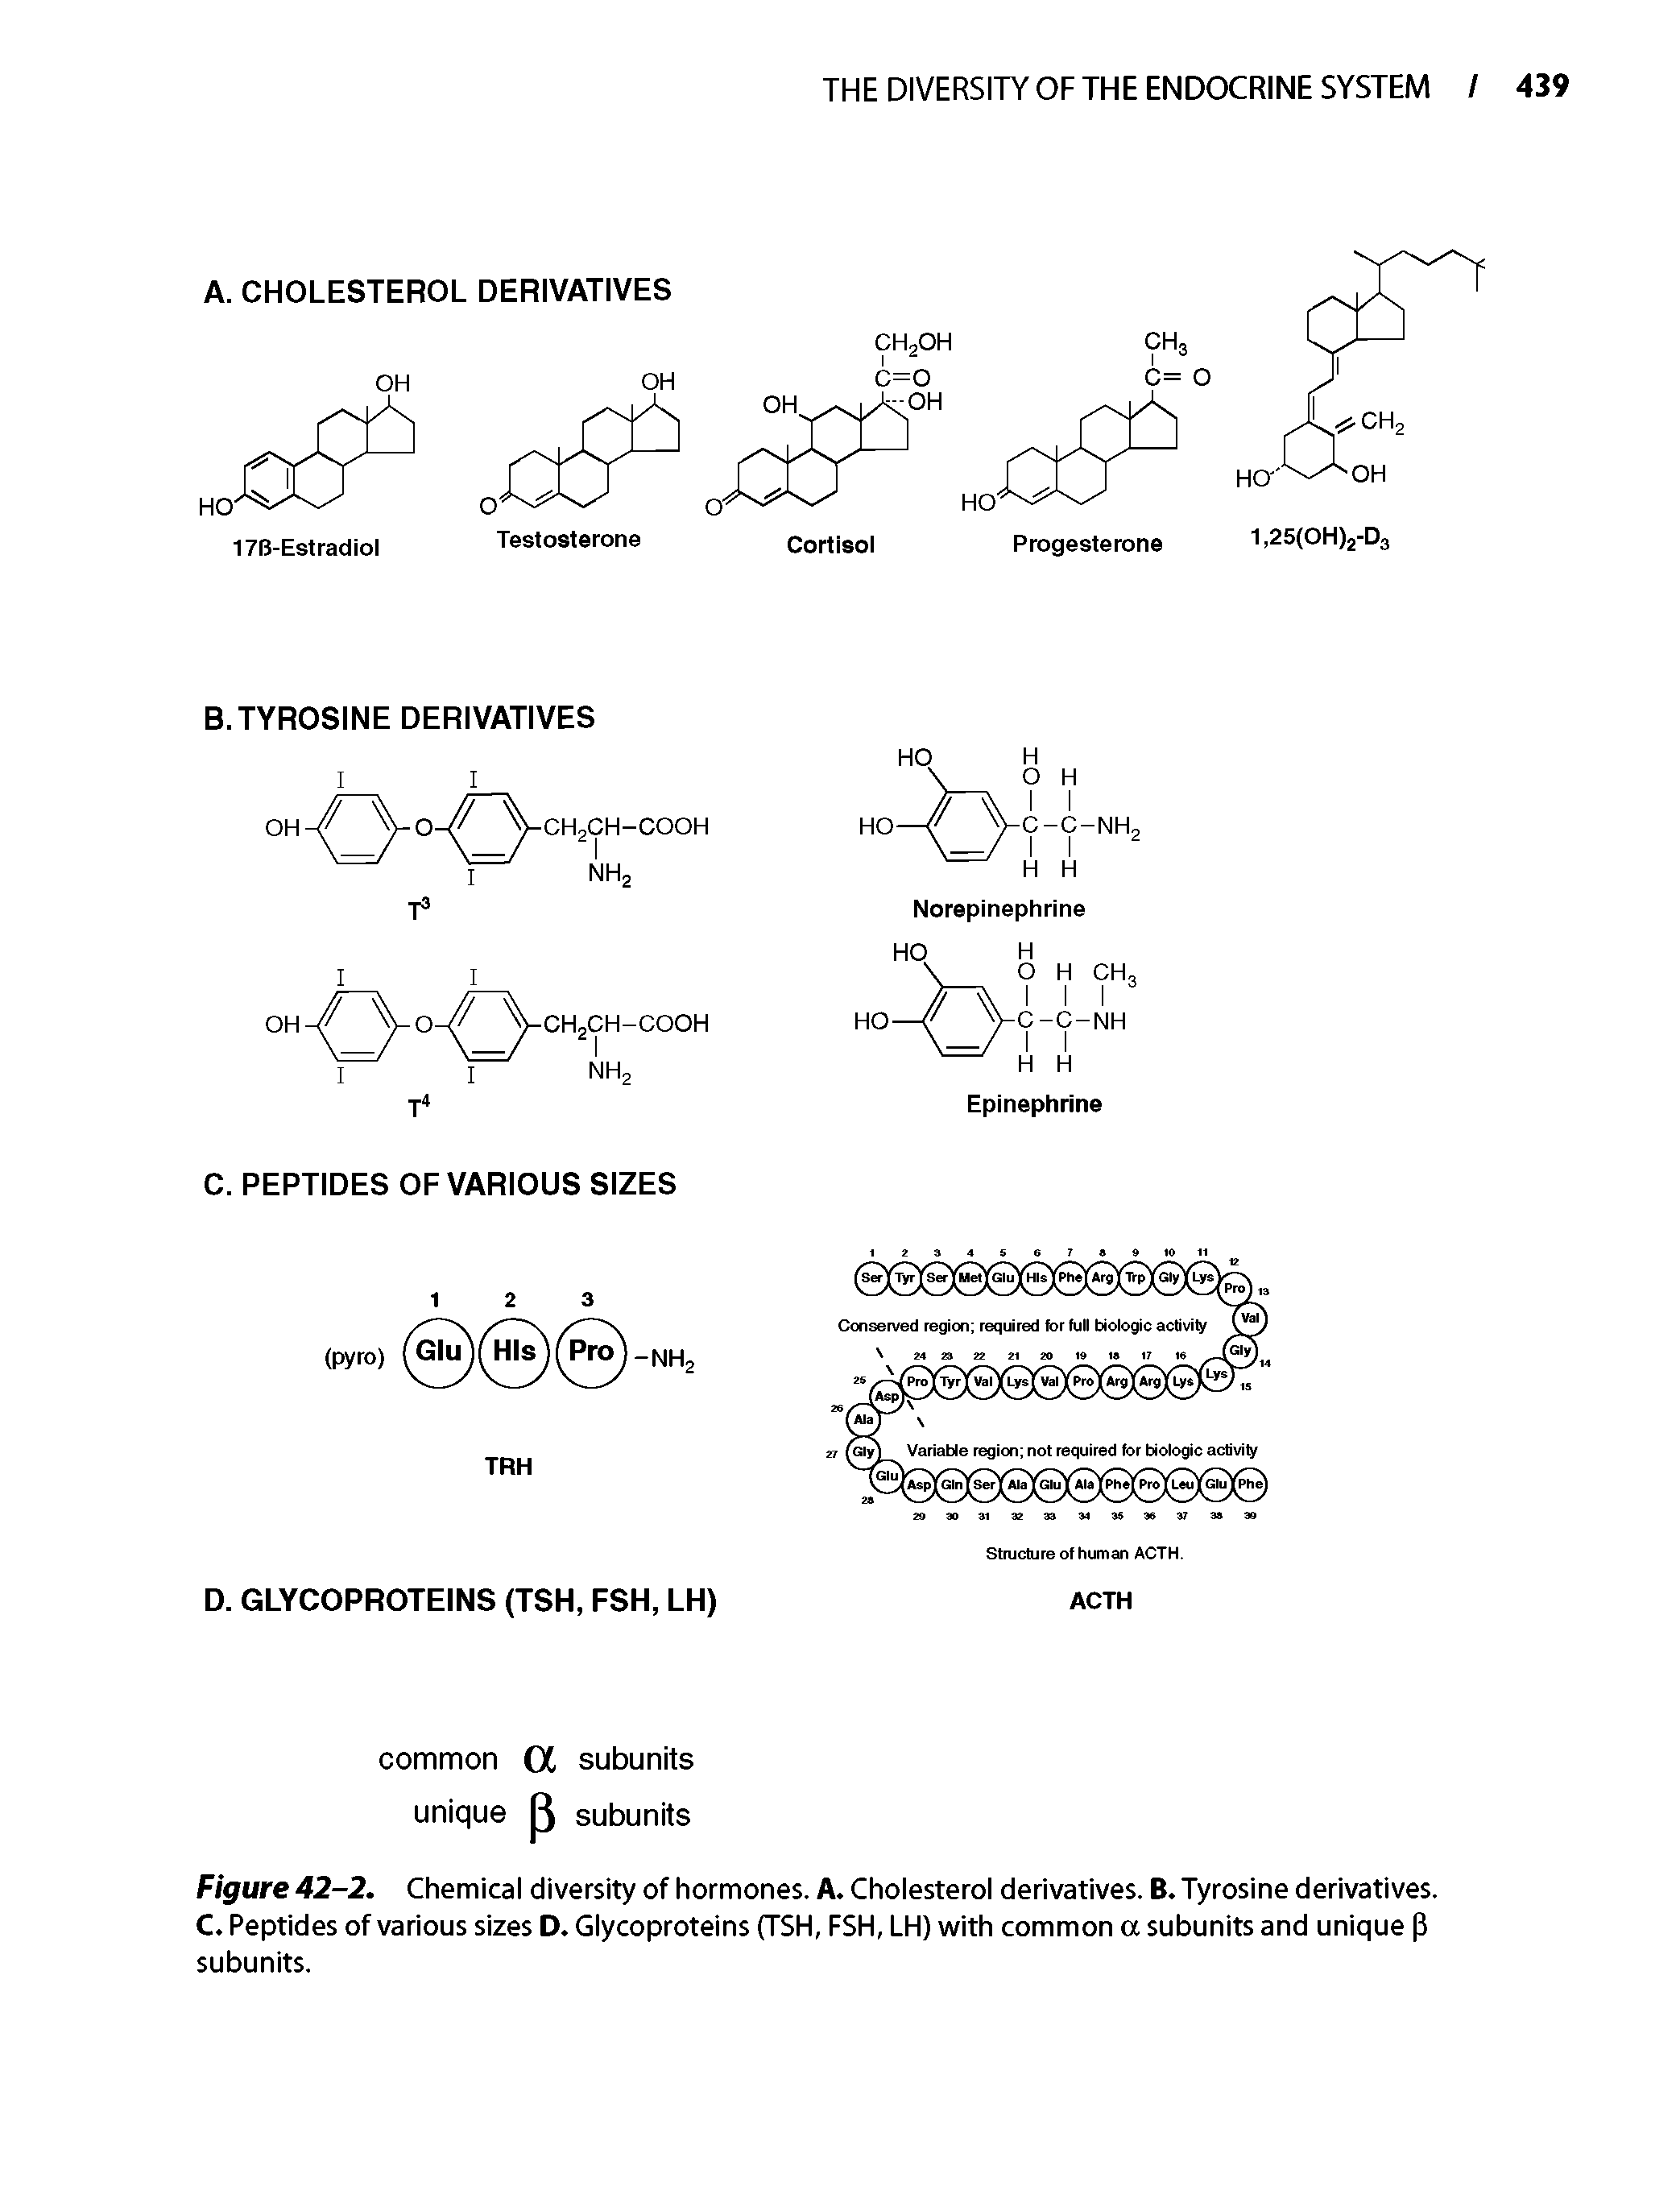 Figure 42-2. Chemical diversity of hormones. A. Cholesterol derivatives. B. Tyrosine derivatives. C. Peptides of various sizes D. Glycoproteins (TSH, FSH, LH) with common a subunits and unique P subunits.